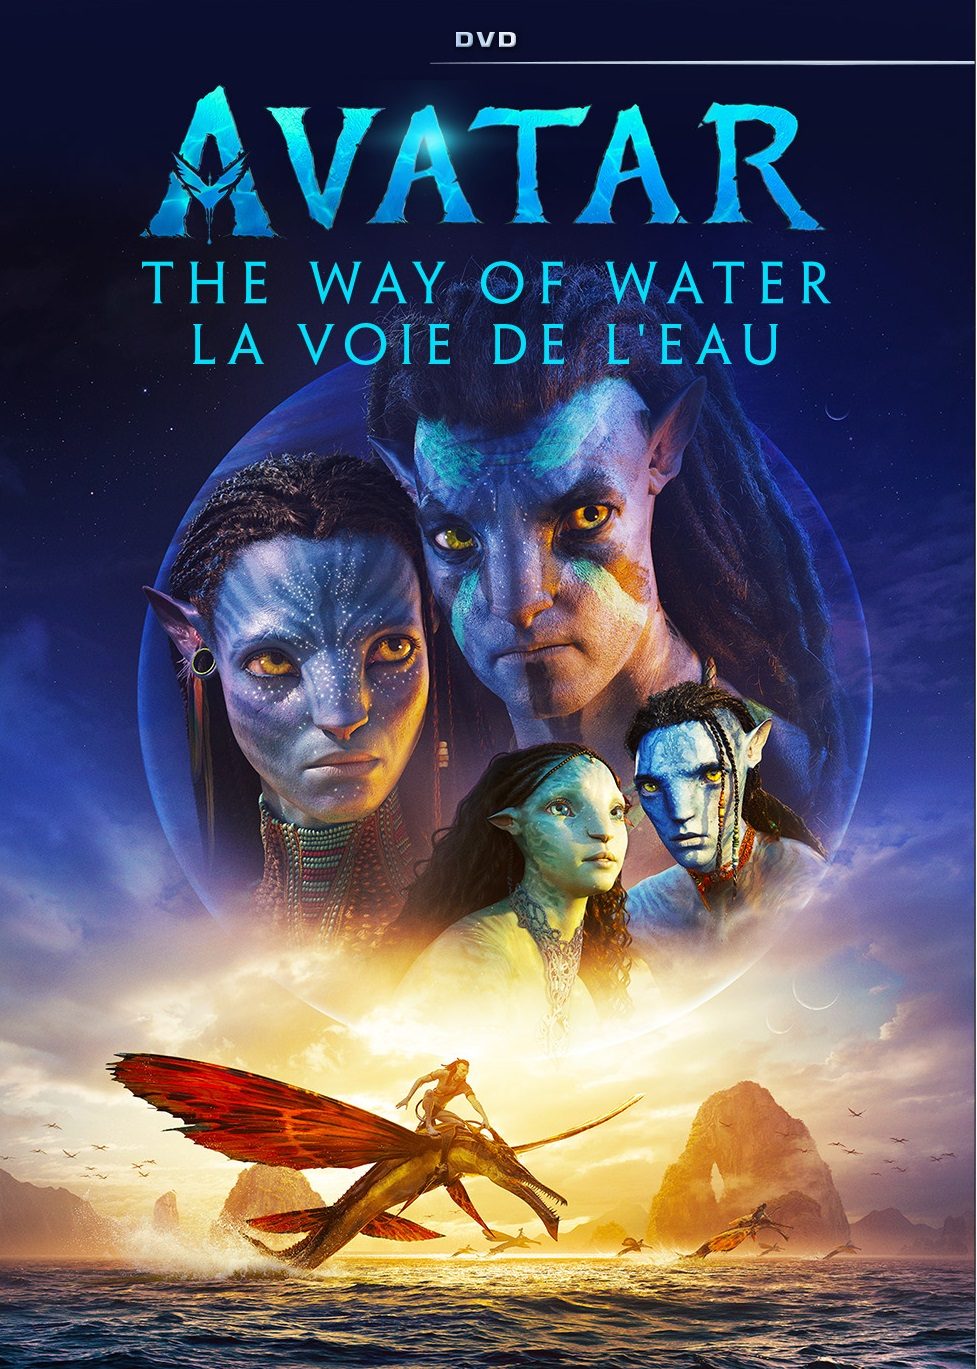 Avatar: The Way of Water (DVD) on MovieShack